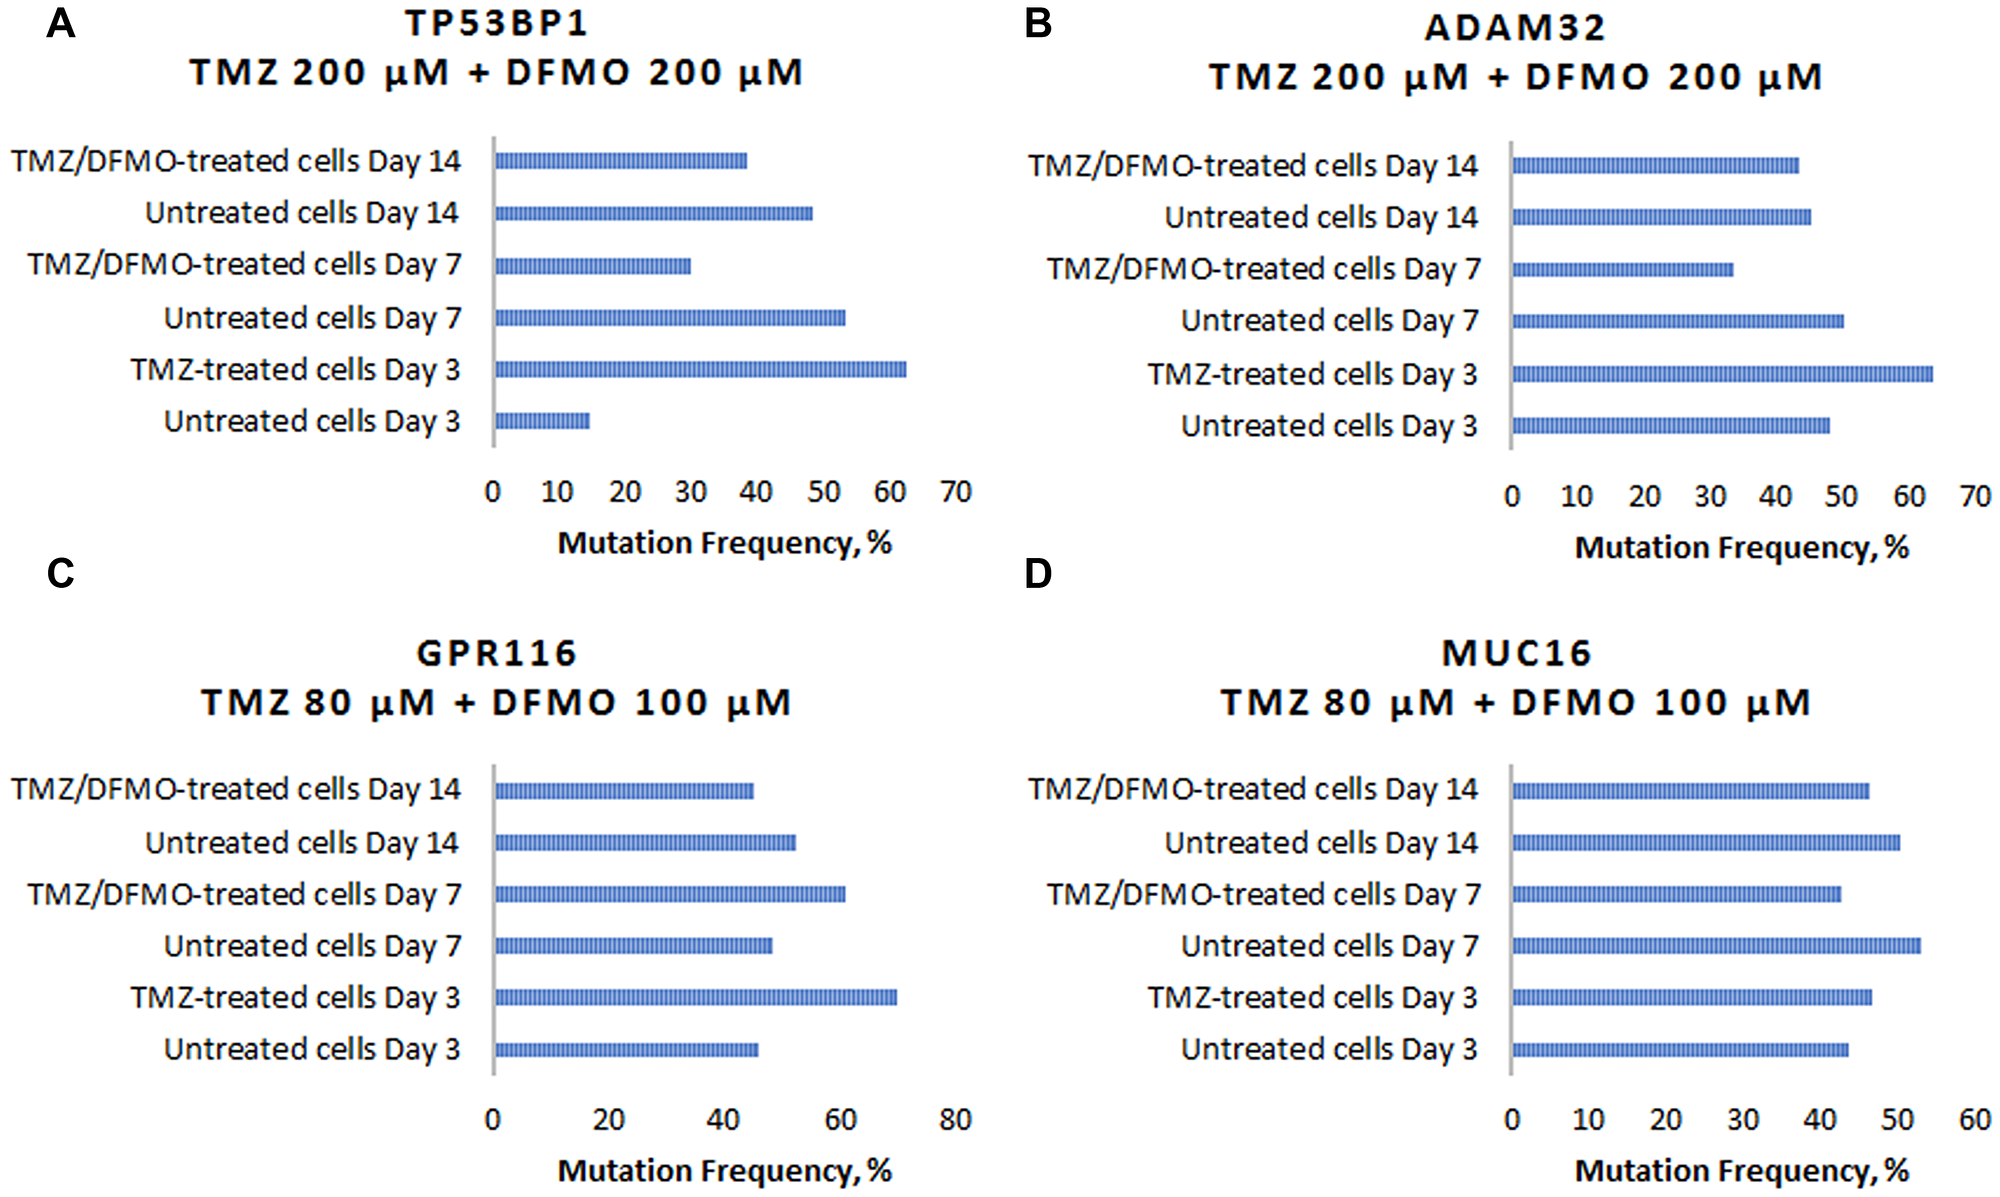 Examples of TMZ-induced mutation frequency increase and subsequent mutation-inhibiting action of DFMO for genes involved in carcinogenesis.